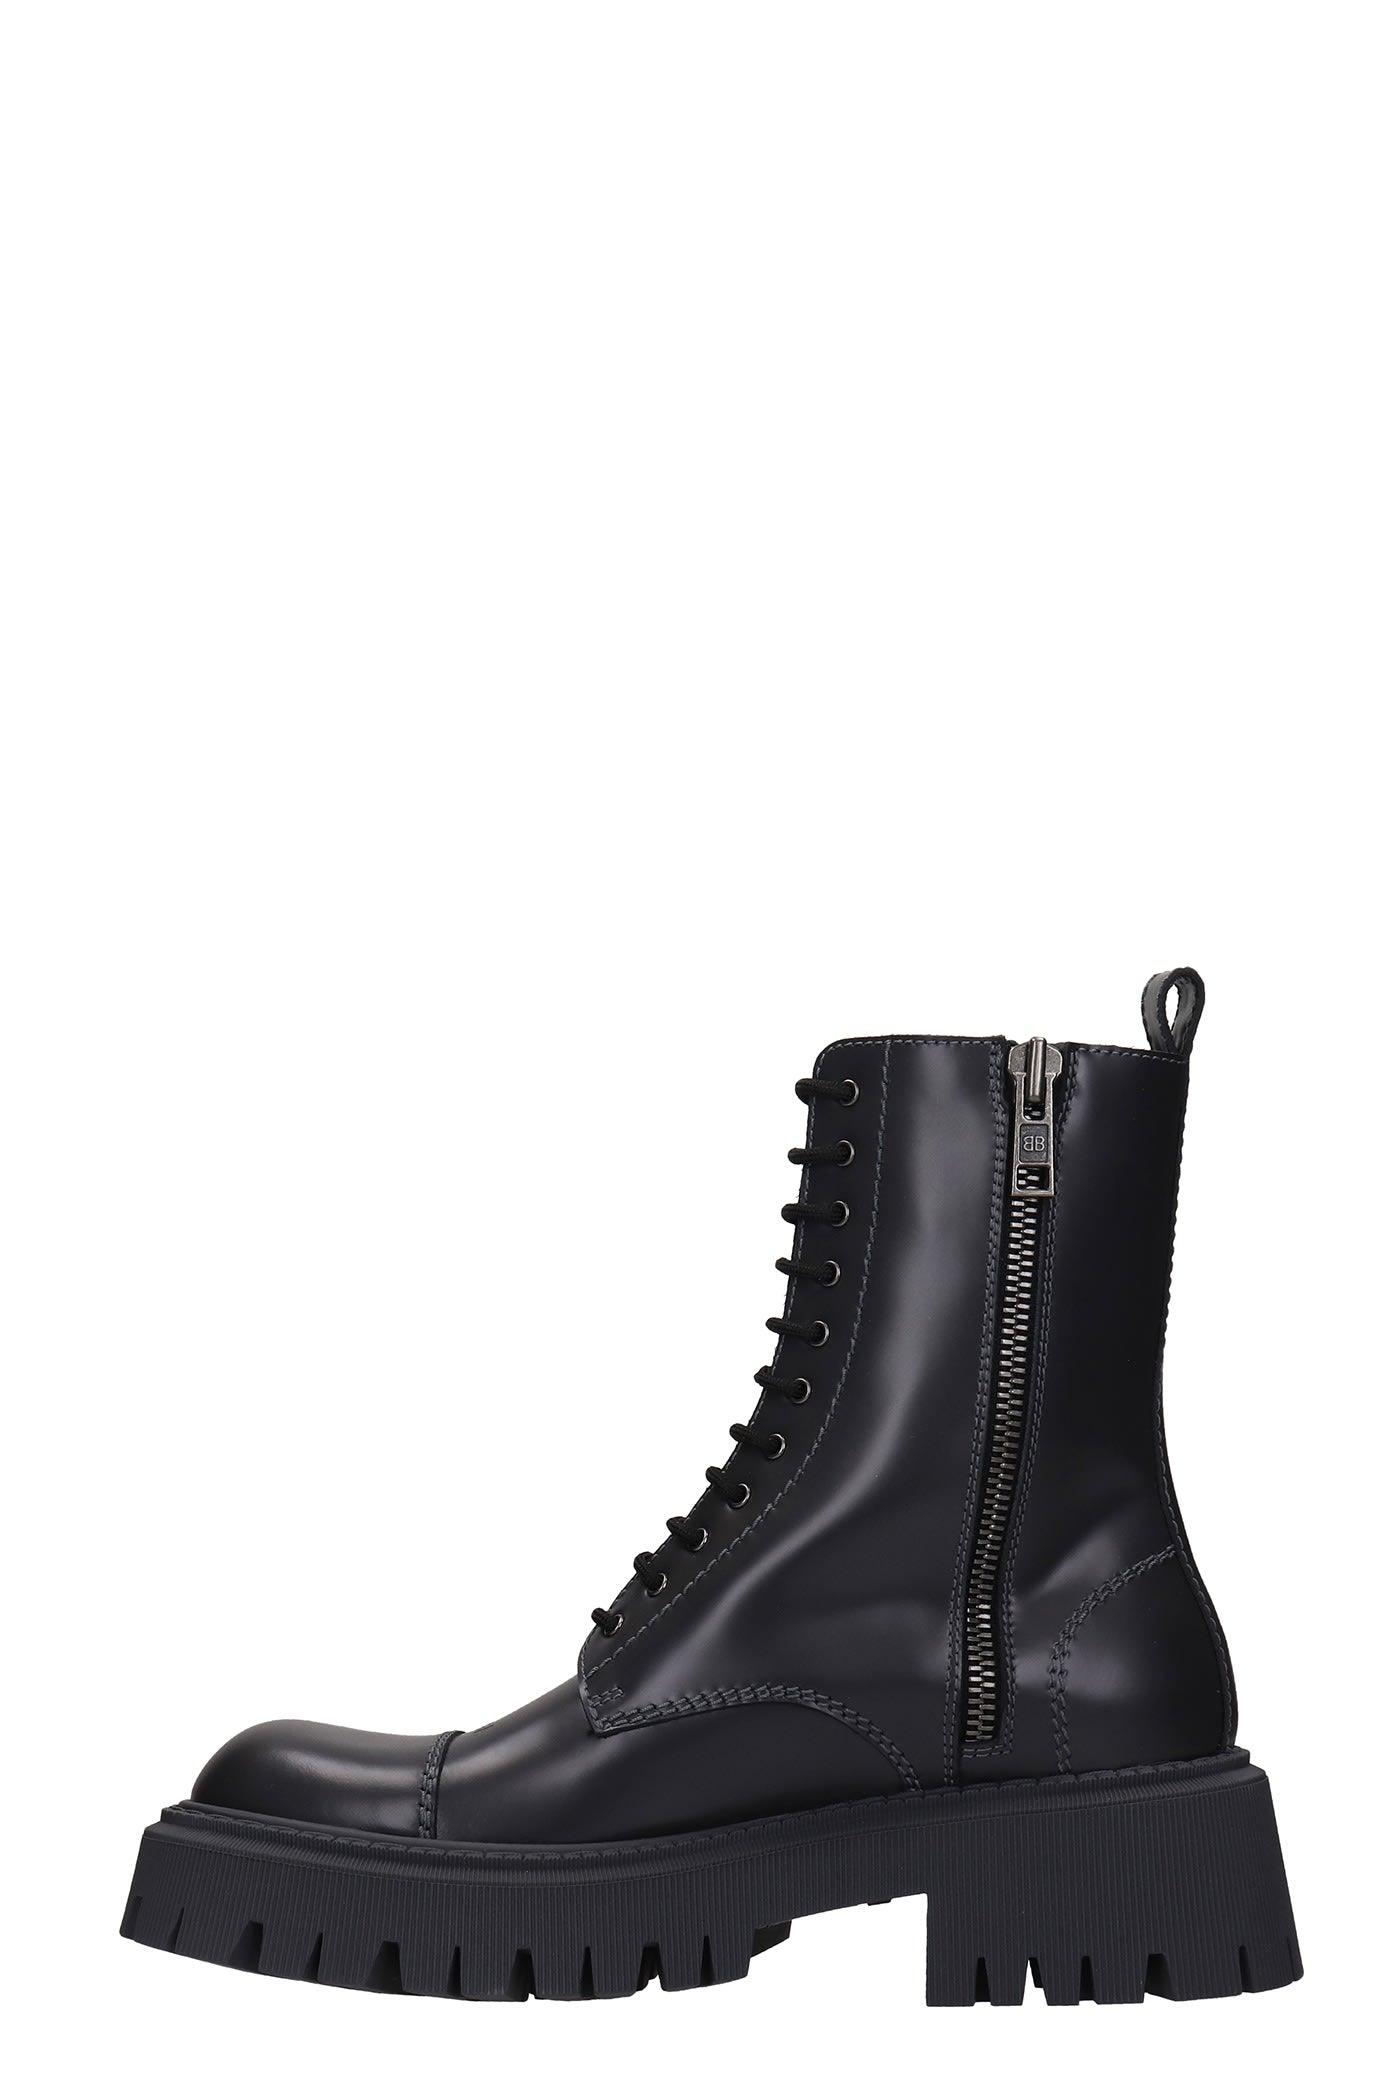 Balenciaga Tractor Leather Platform Ankle Boots in Black  Lyst